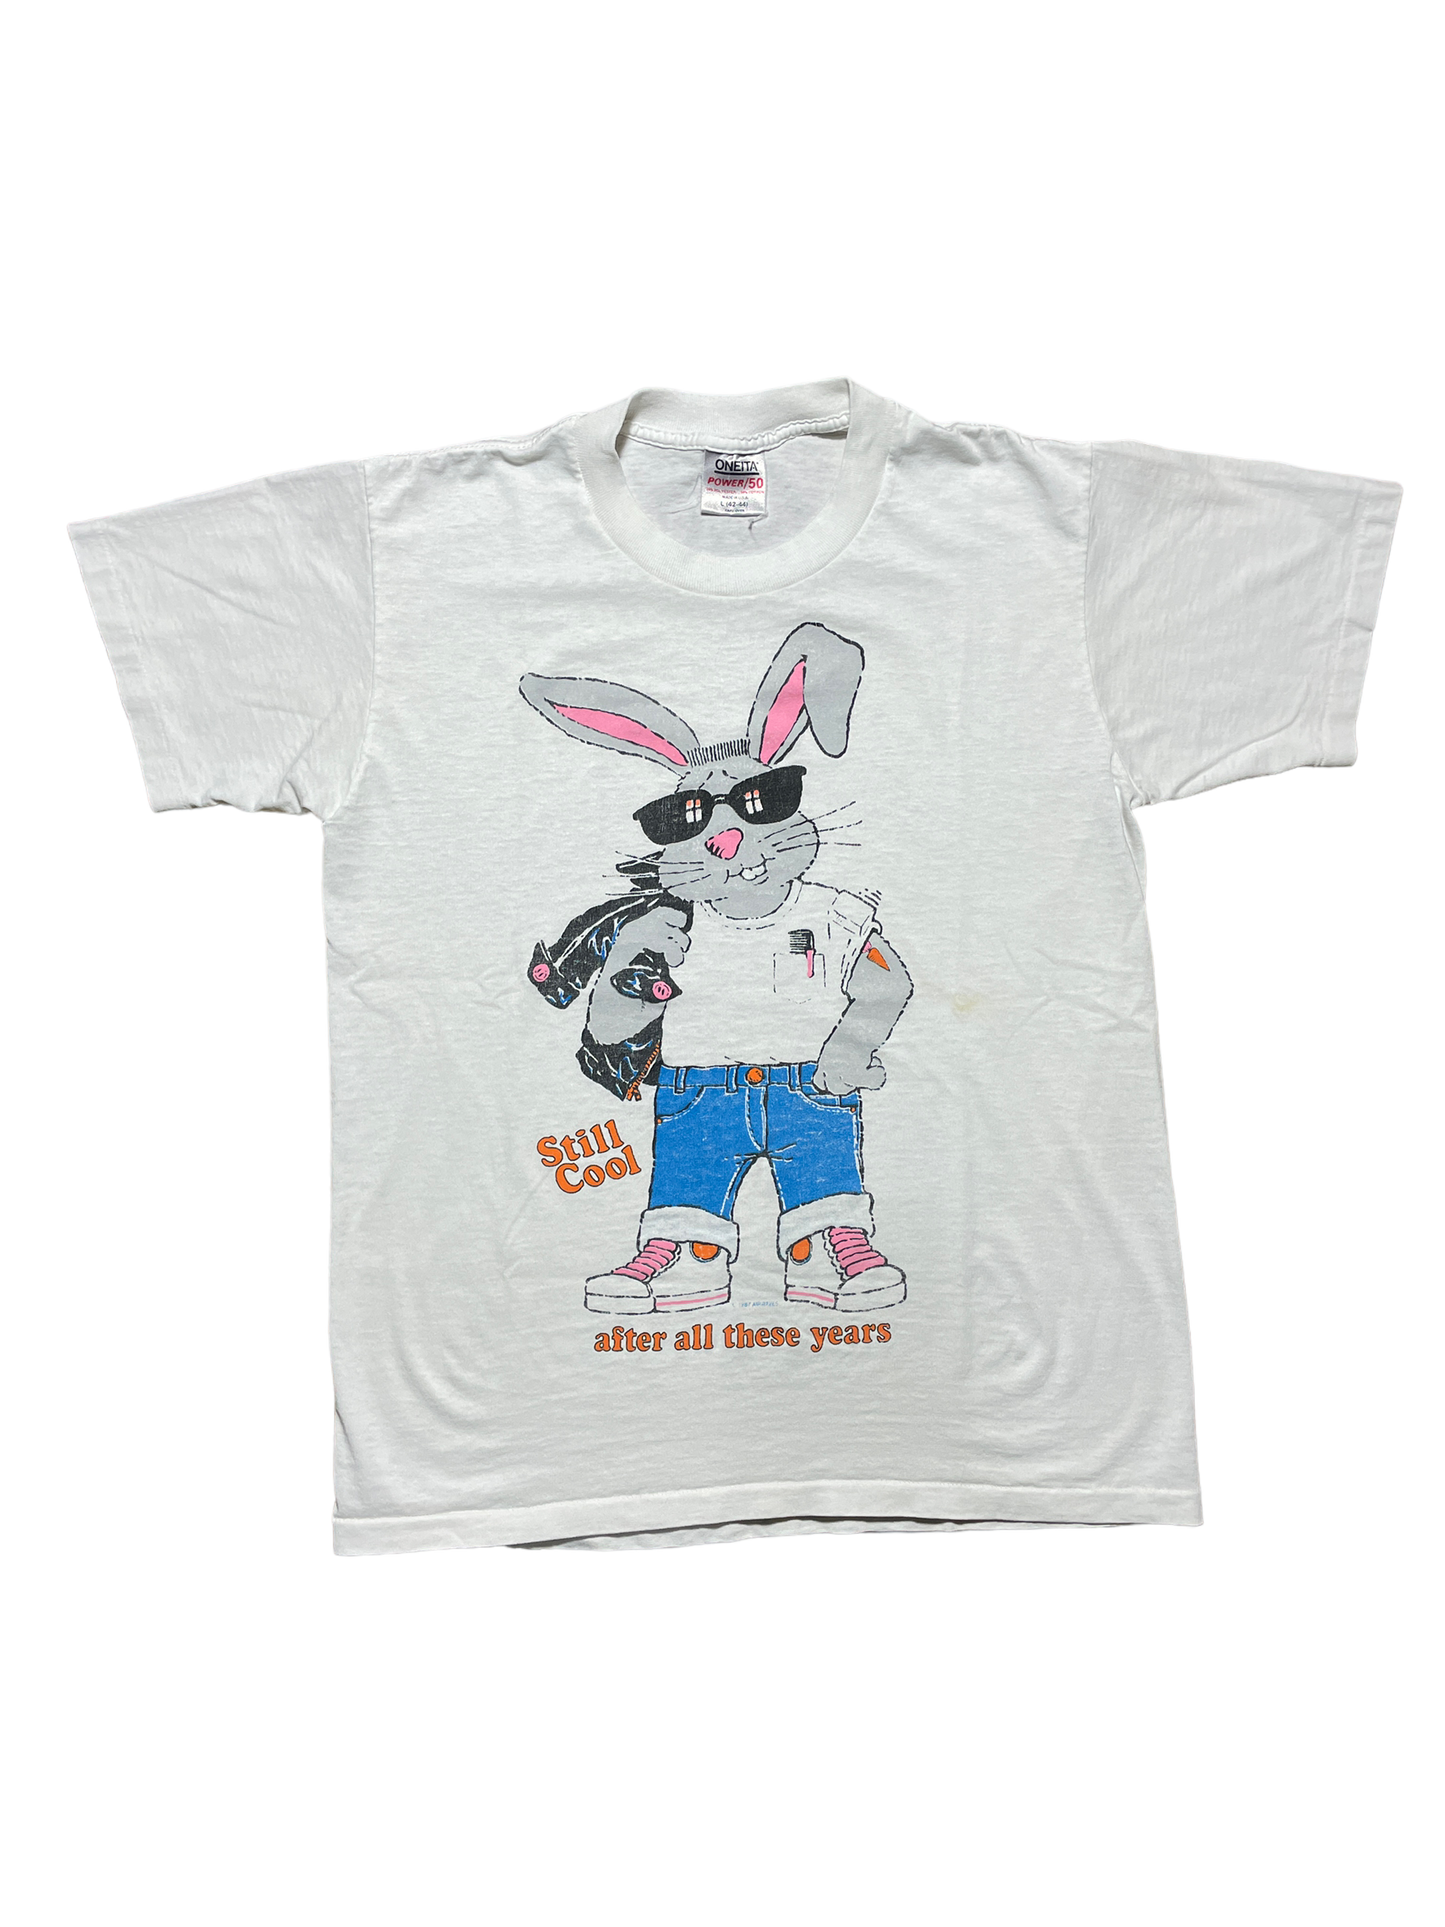 1987 Vintage Bunny Rabbit "Still Cool After All These Years" Graphic Tee